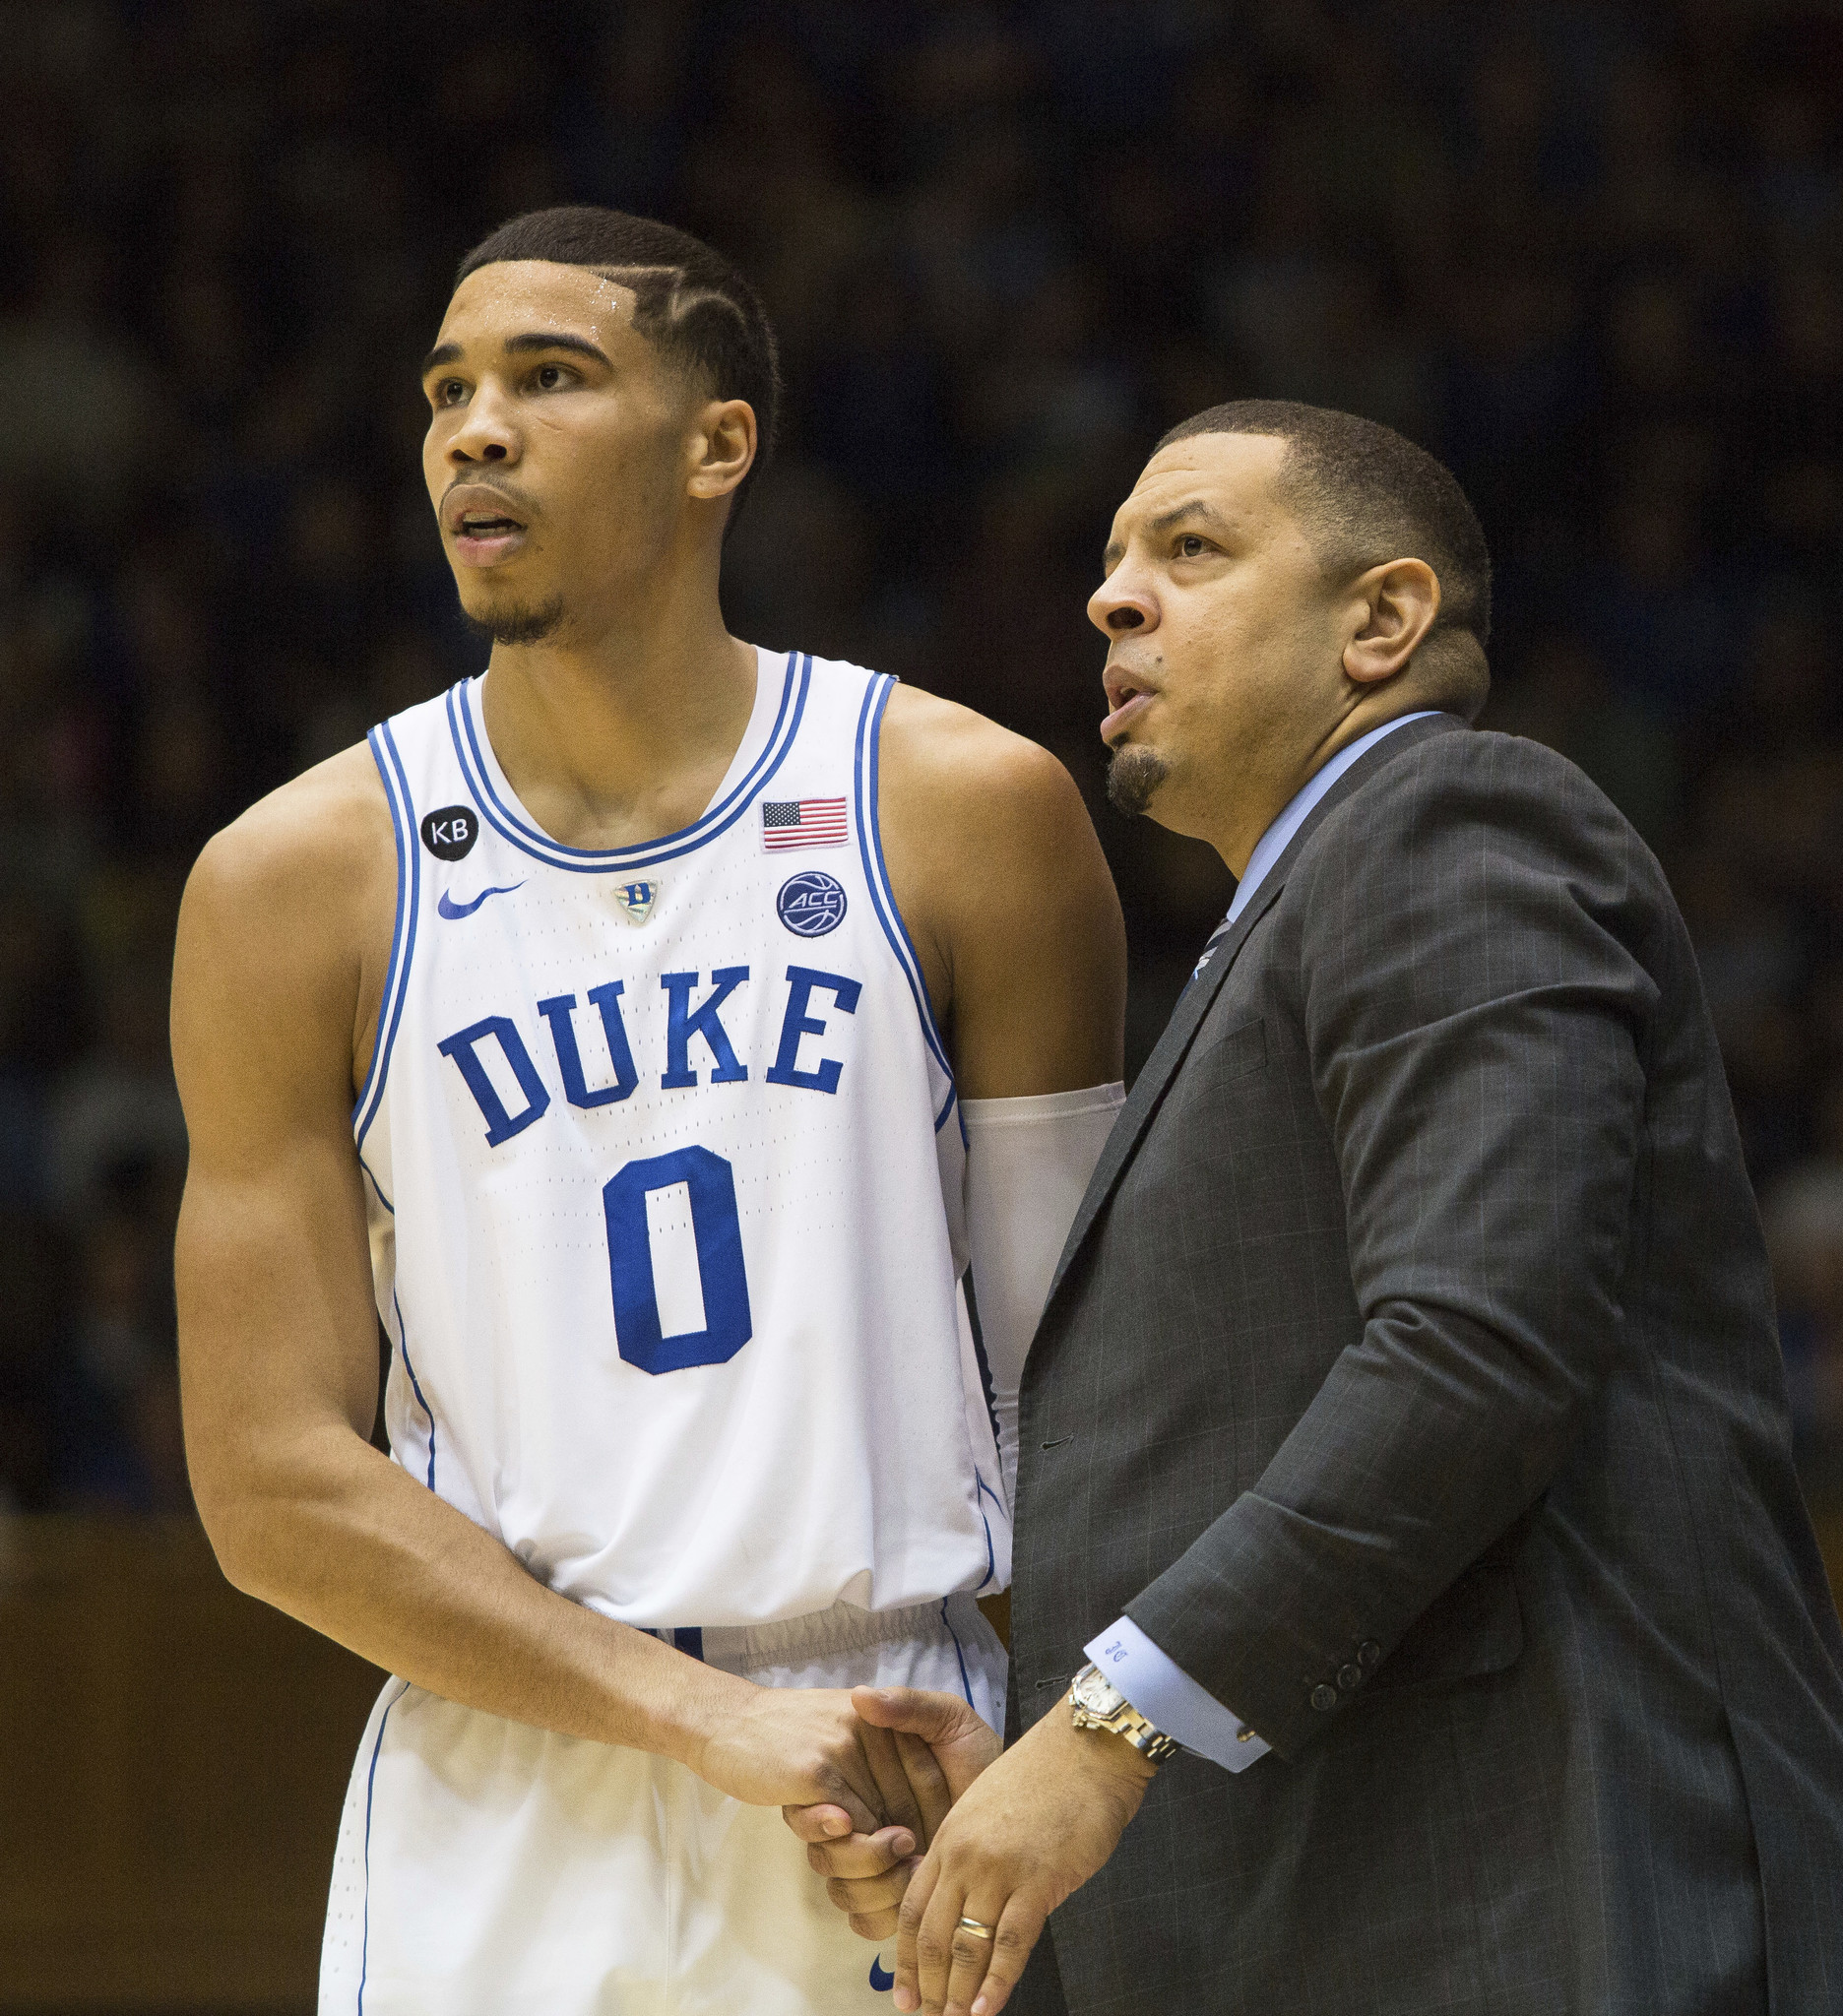 Duke's Capel copes with father's illness during difficult season - Daily Press